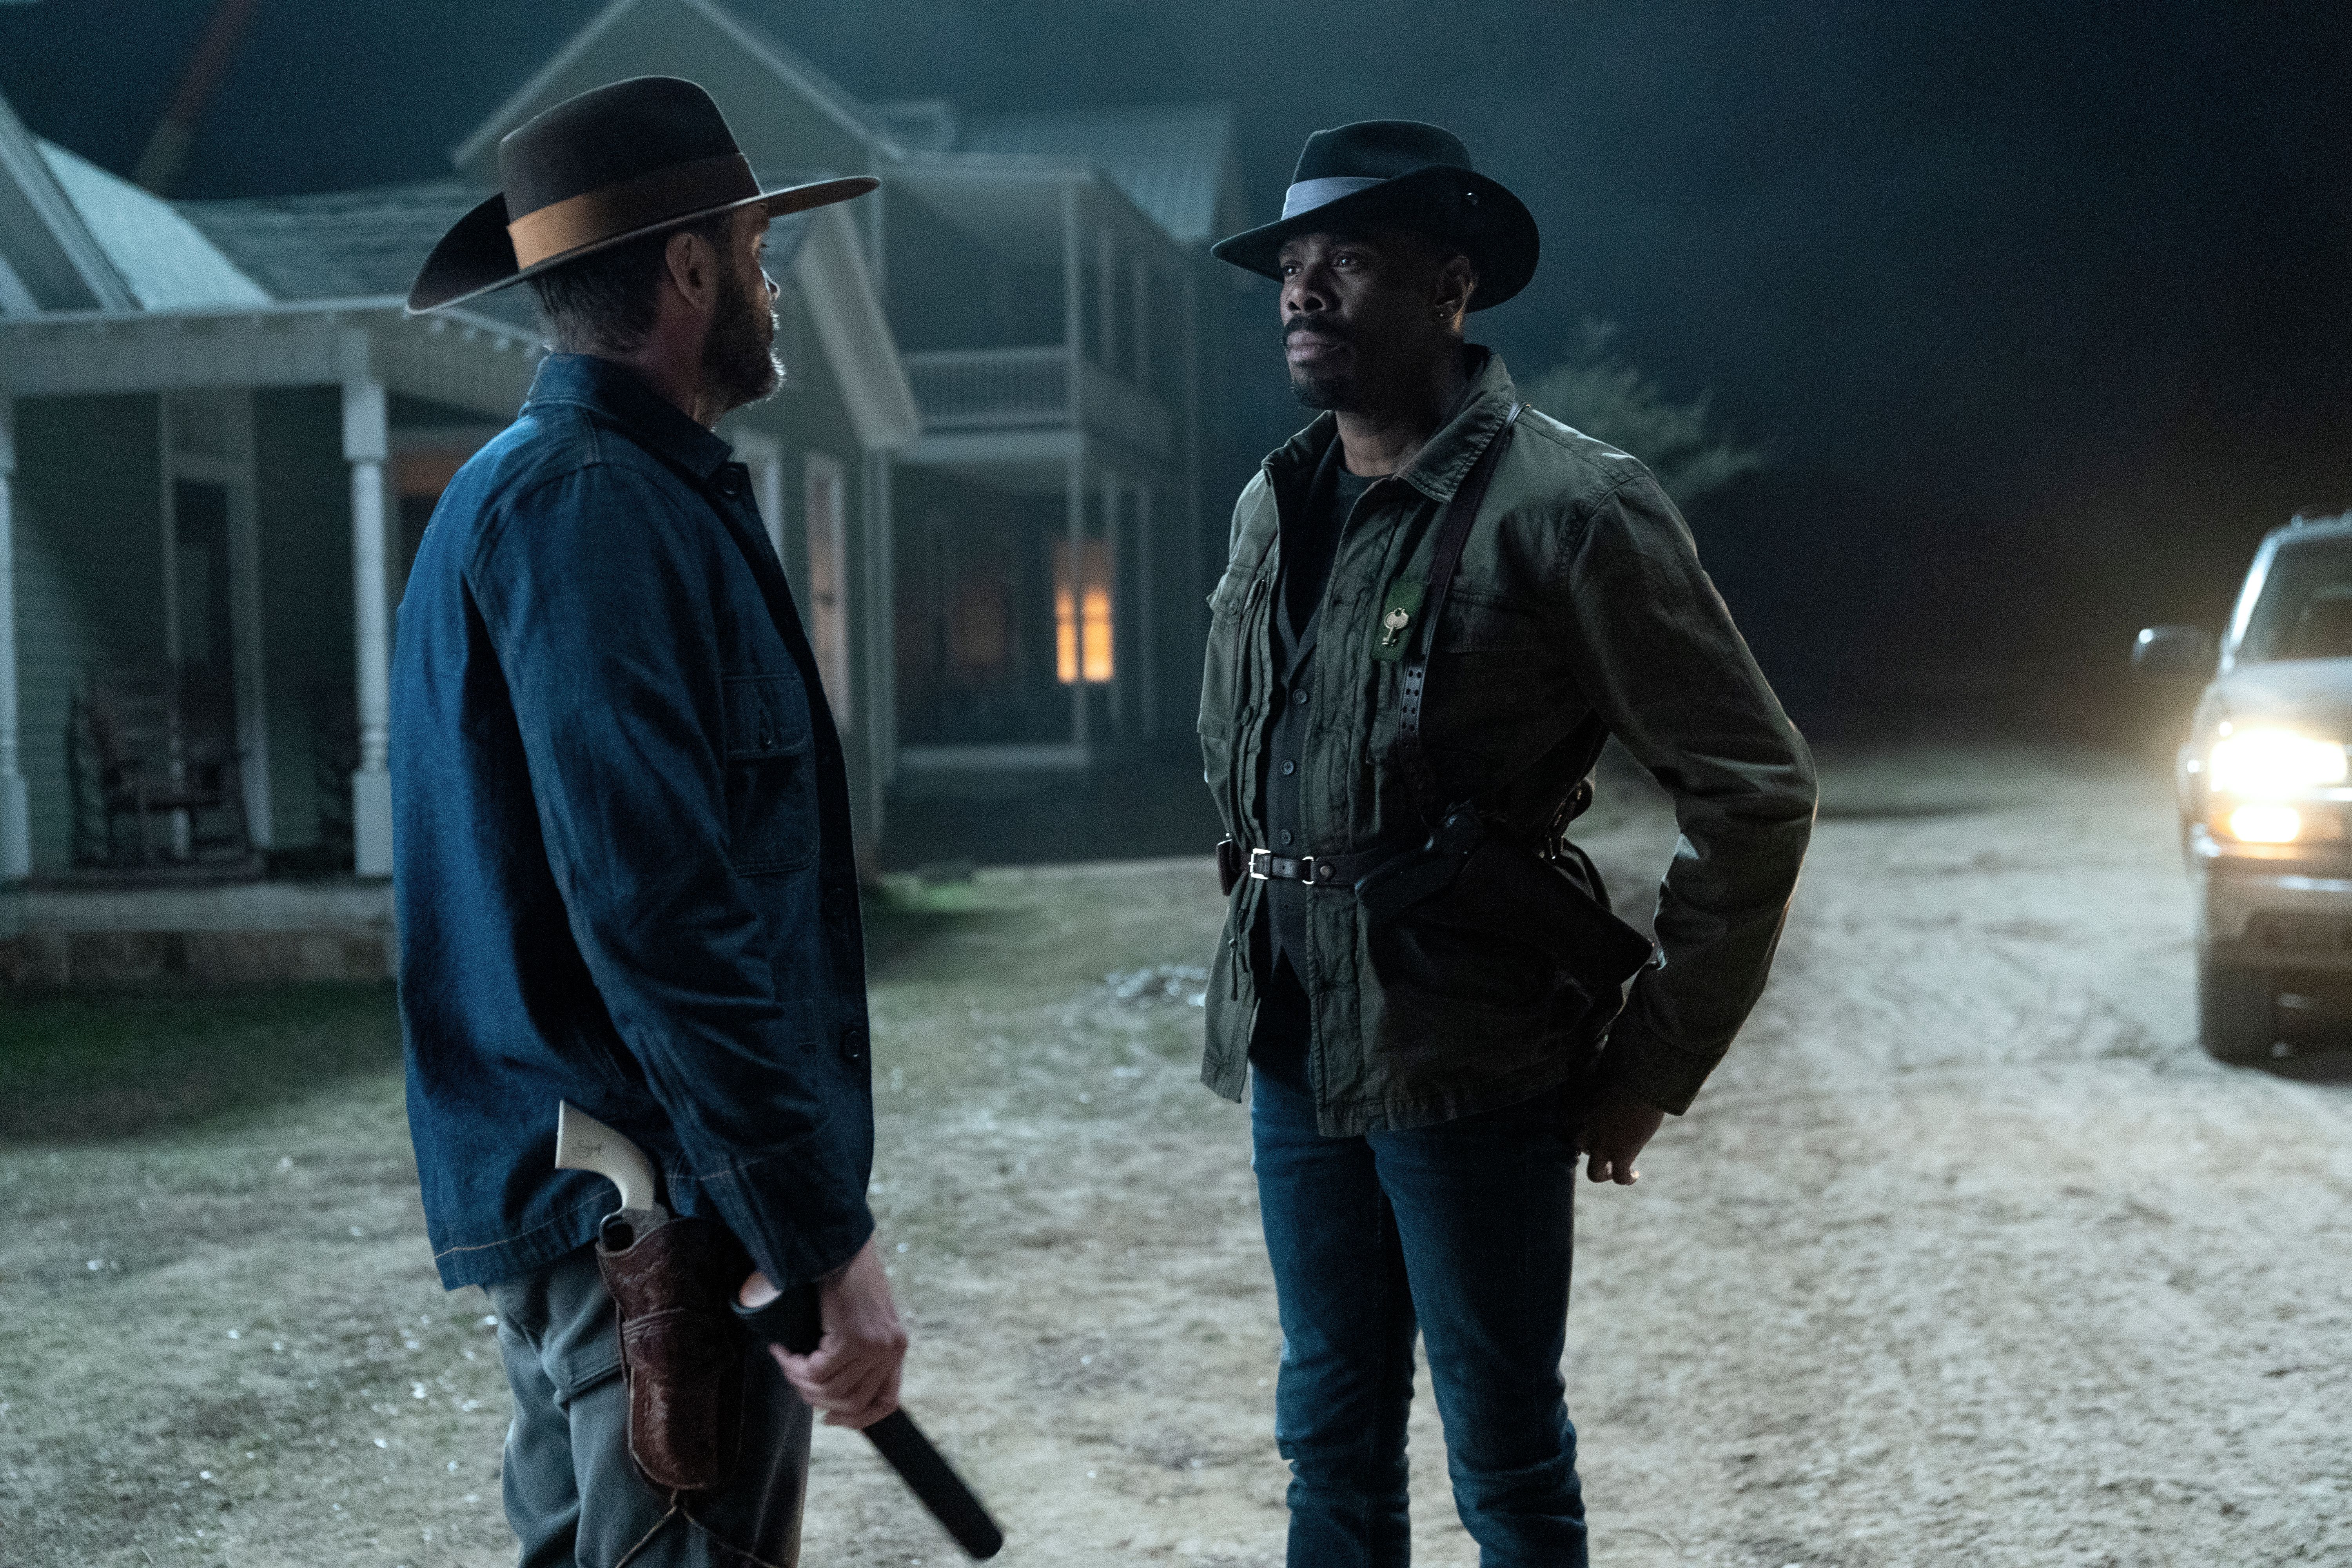 Garret Dillahunt as John Dorie and Colman Domingo as Victor Strand in Fear The Walking Dead